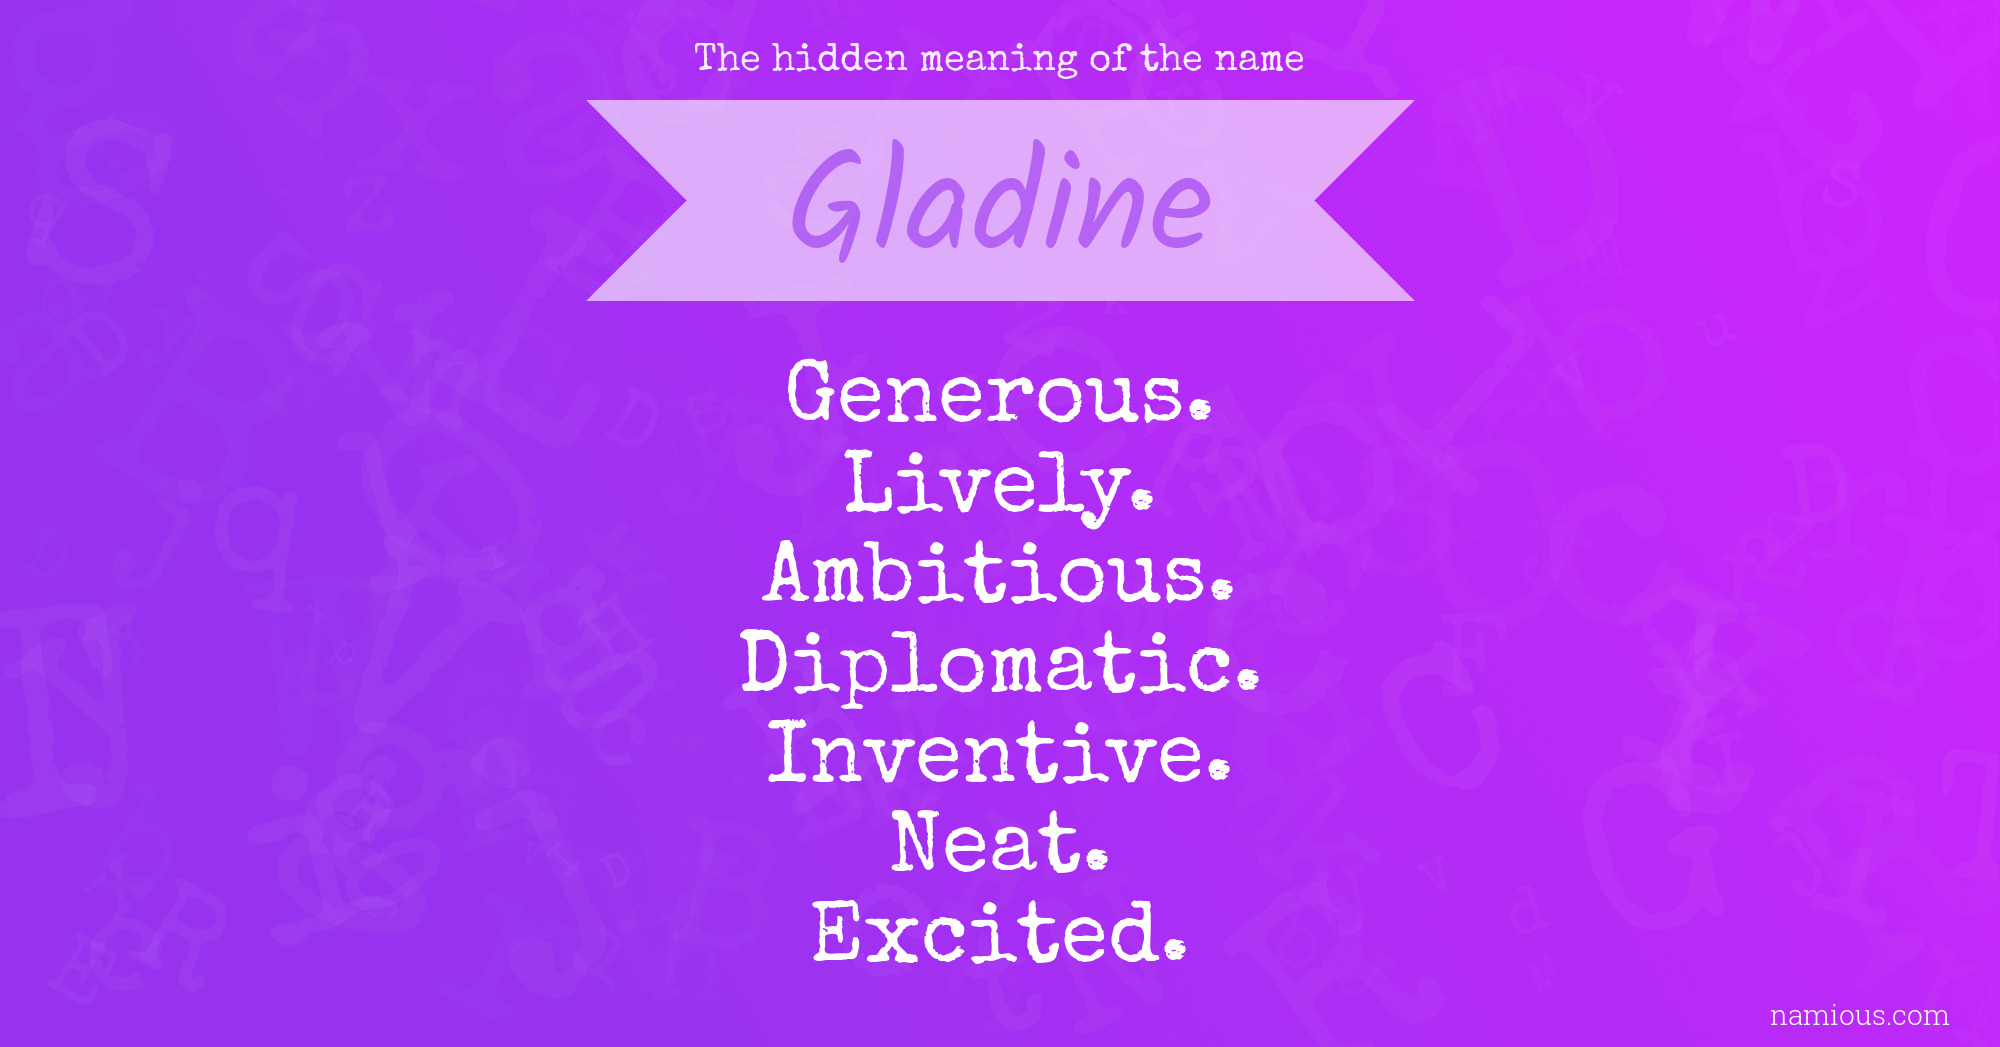 The hidden meaning of the name Gladine